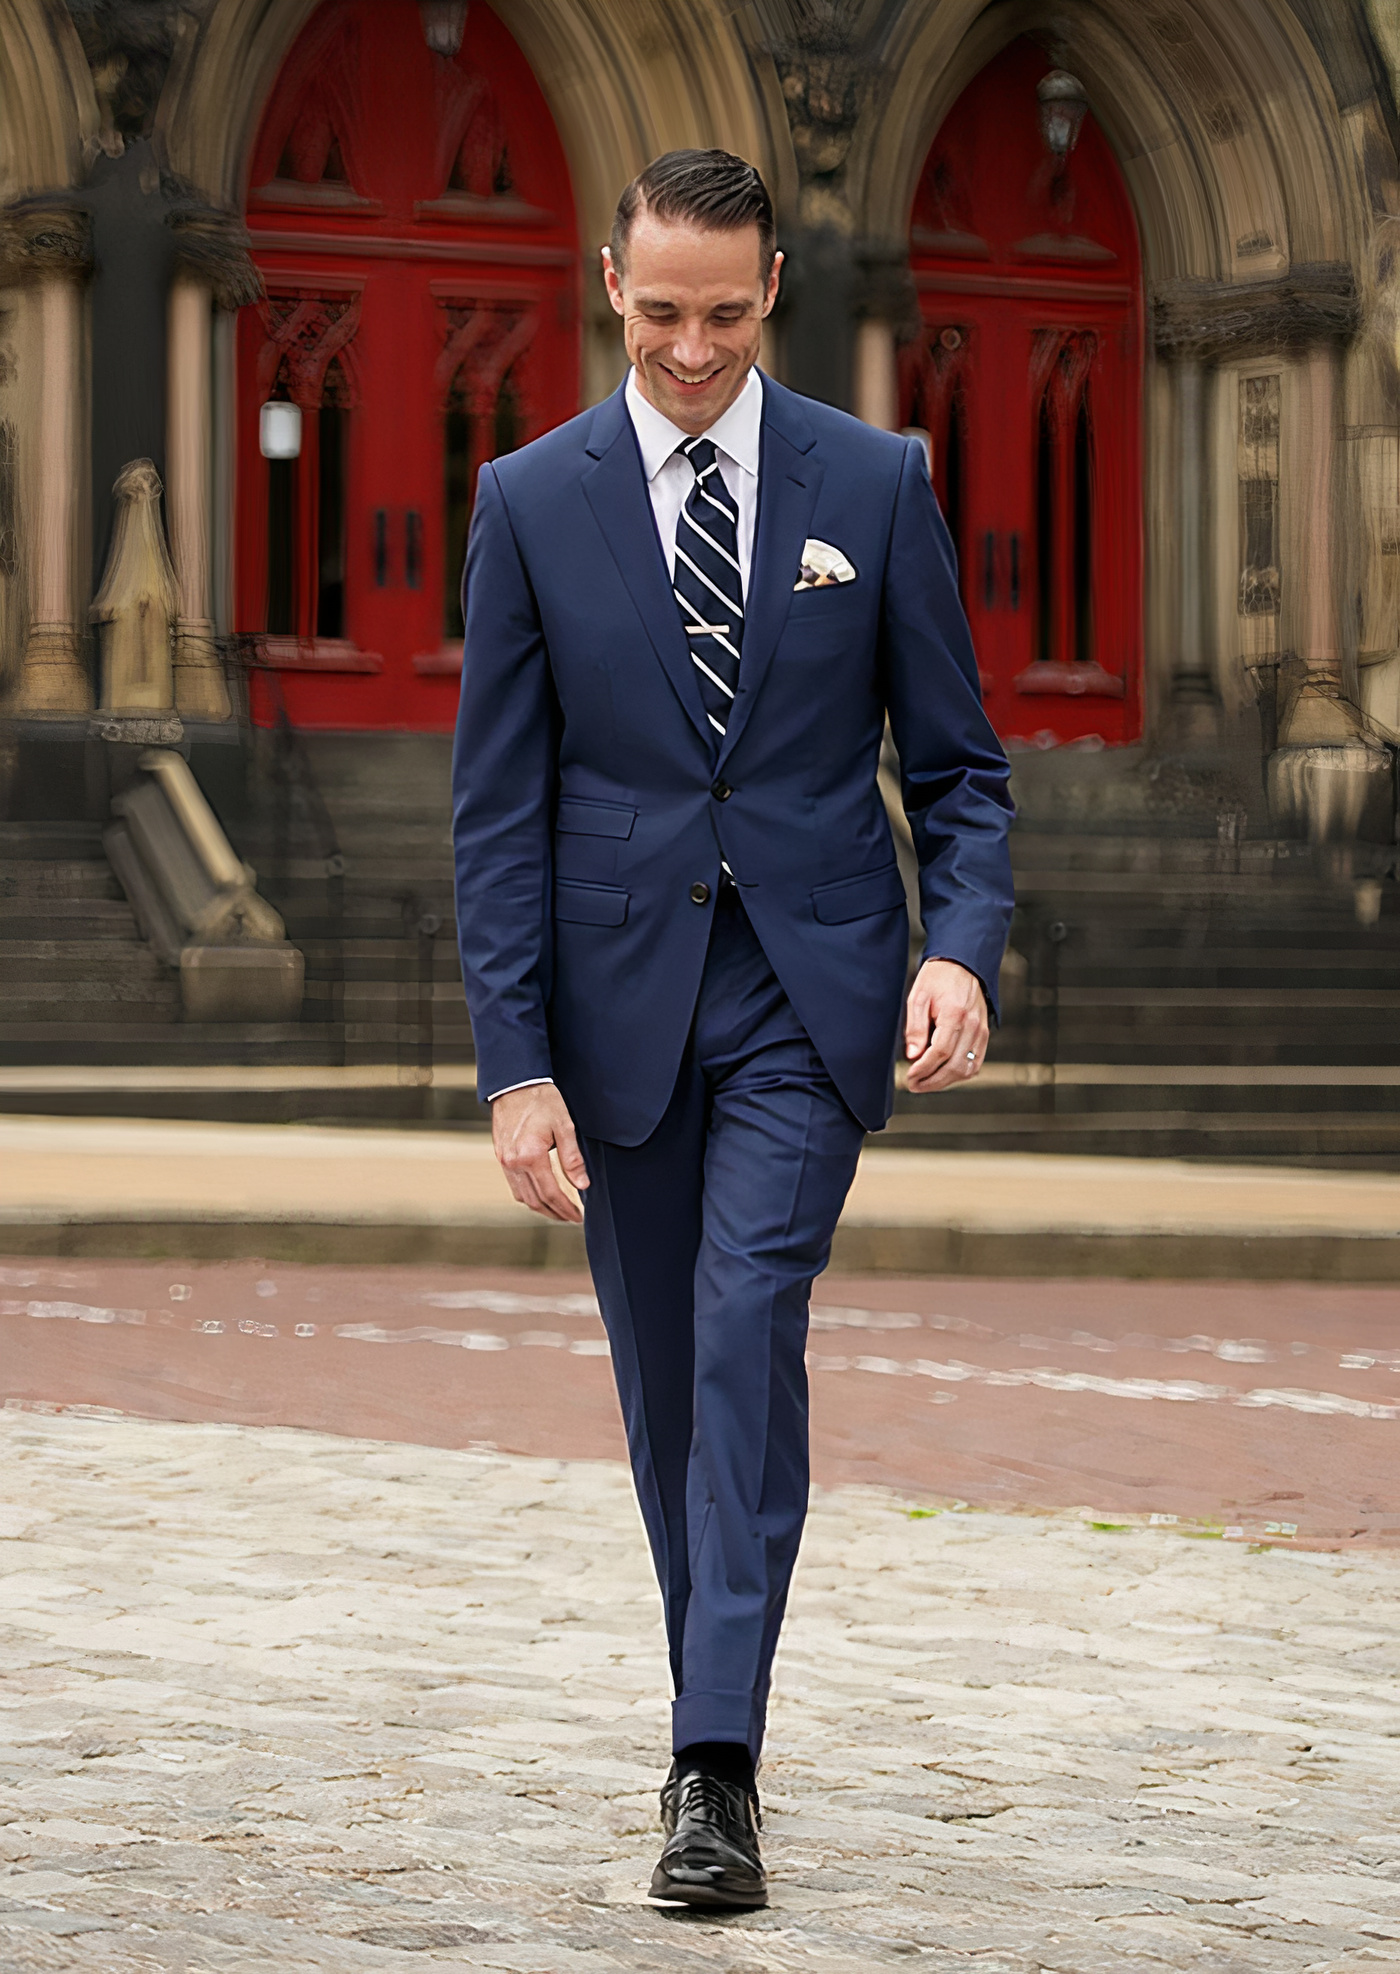 Navy suit, white dress shirt, and black oxford shoes